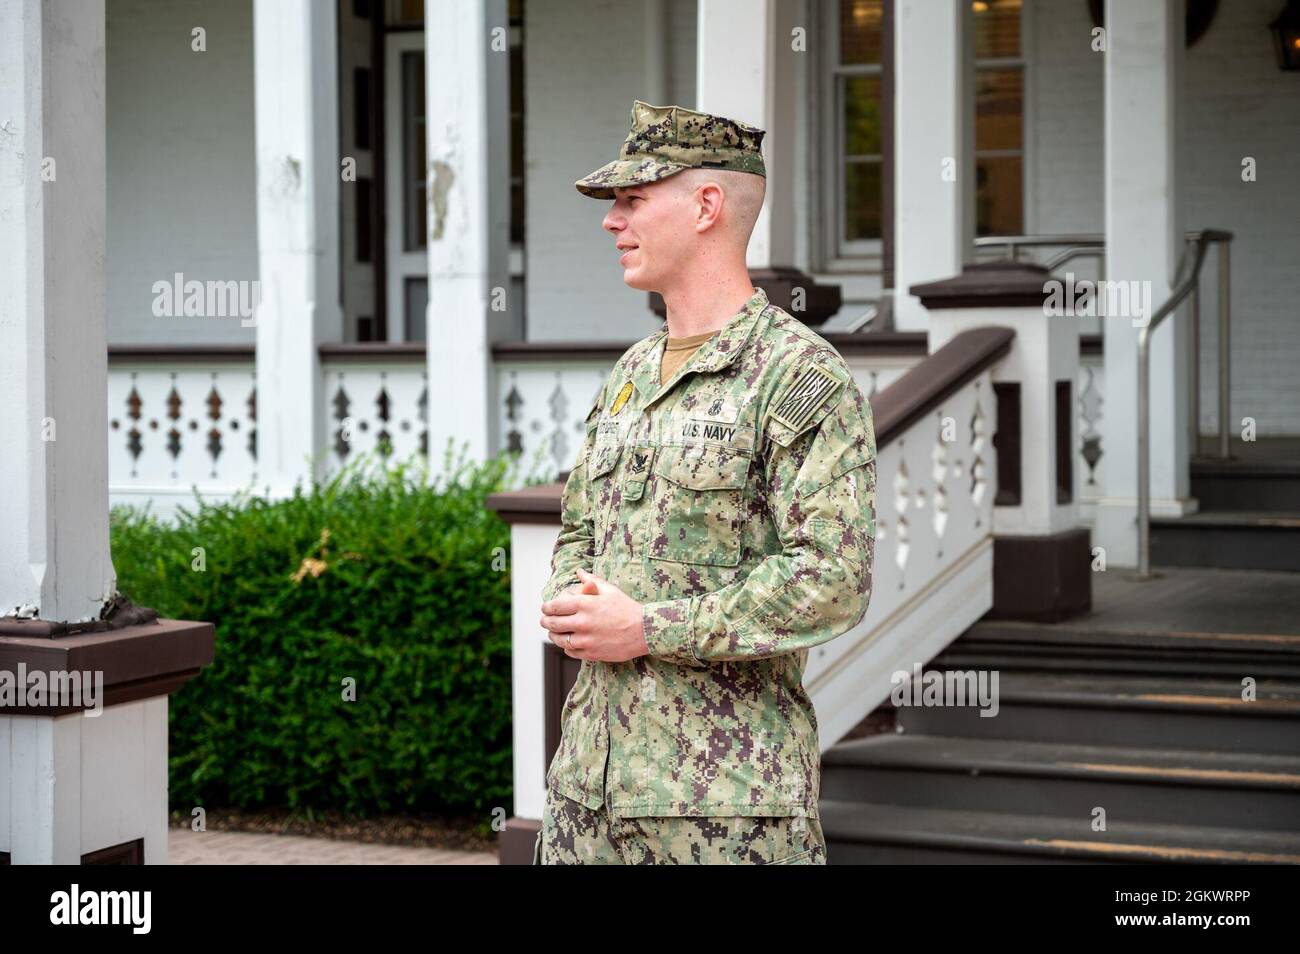 WASHINGTON, DC (July 12, 2021) – Master-at-Arms 2nd Class Tyrell Dugre addresses his colleagues and family members during his reenlistment ceremony, held onboard Washington Navy Yard. Stock Photo